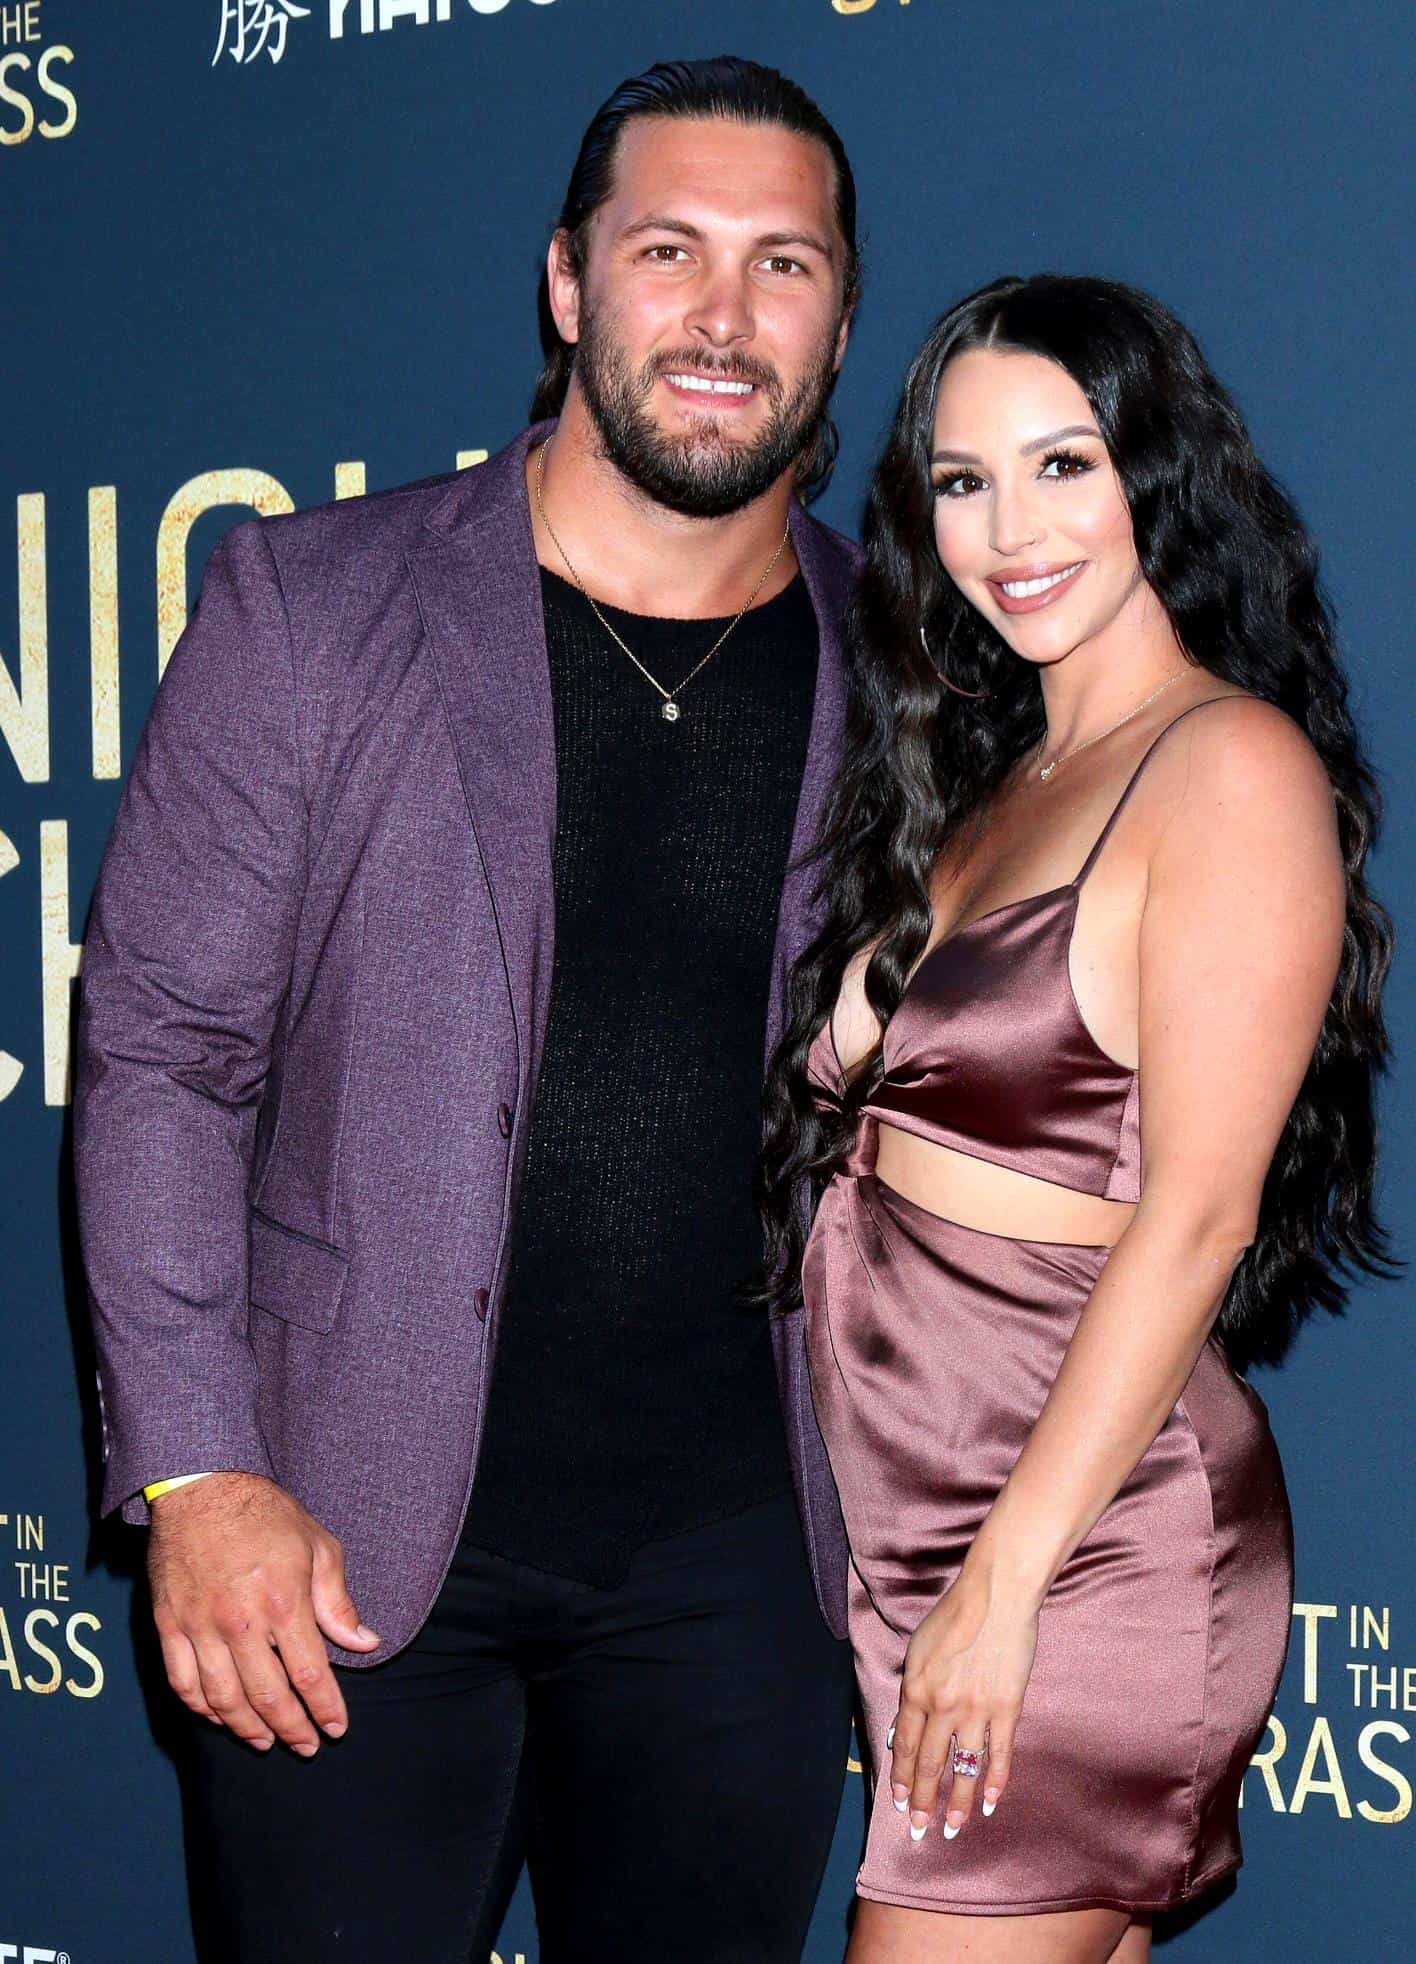 PHOTOS: Vanderpump Rules' Scheana Shay is Engaged to Brock Davies, See Pics of Her Massive Diamond Ring as She Celebrates With Cast Mates